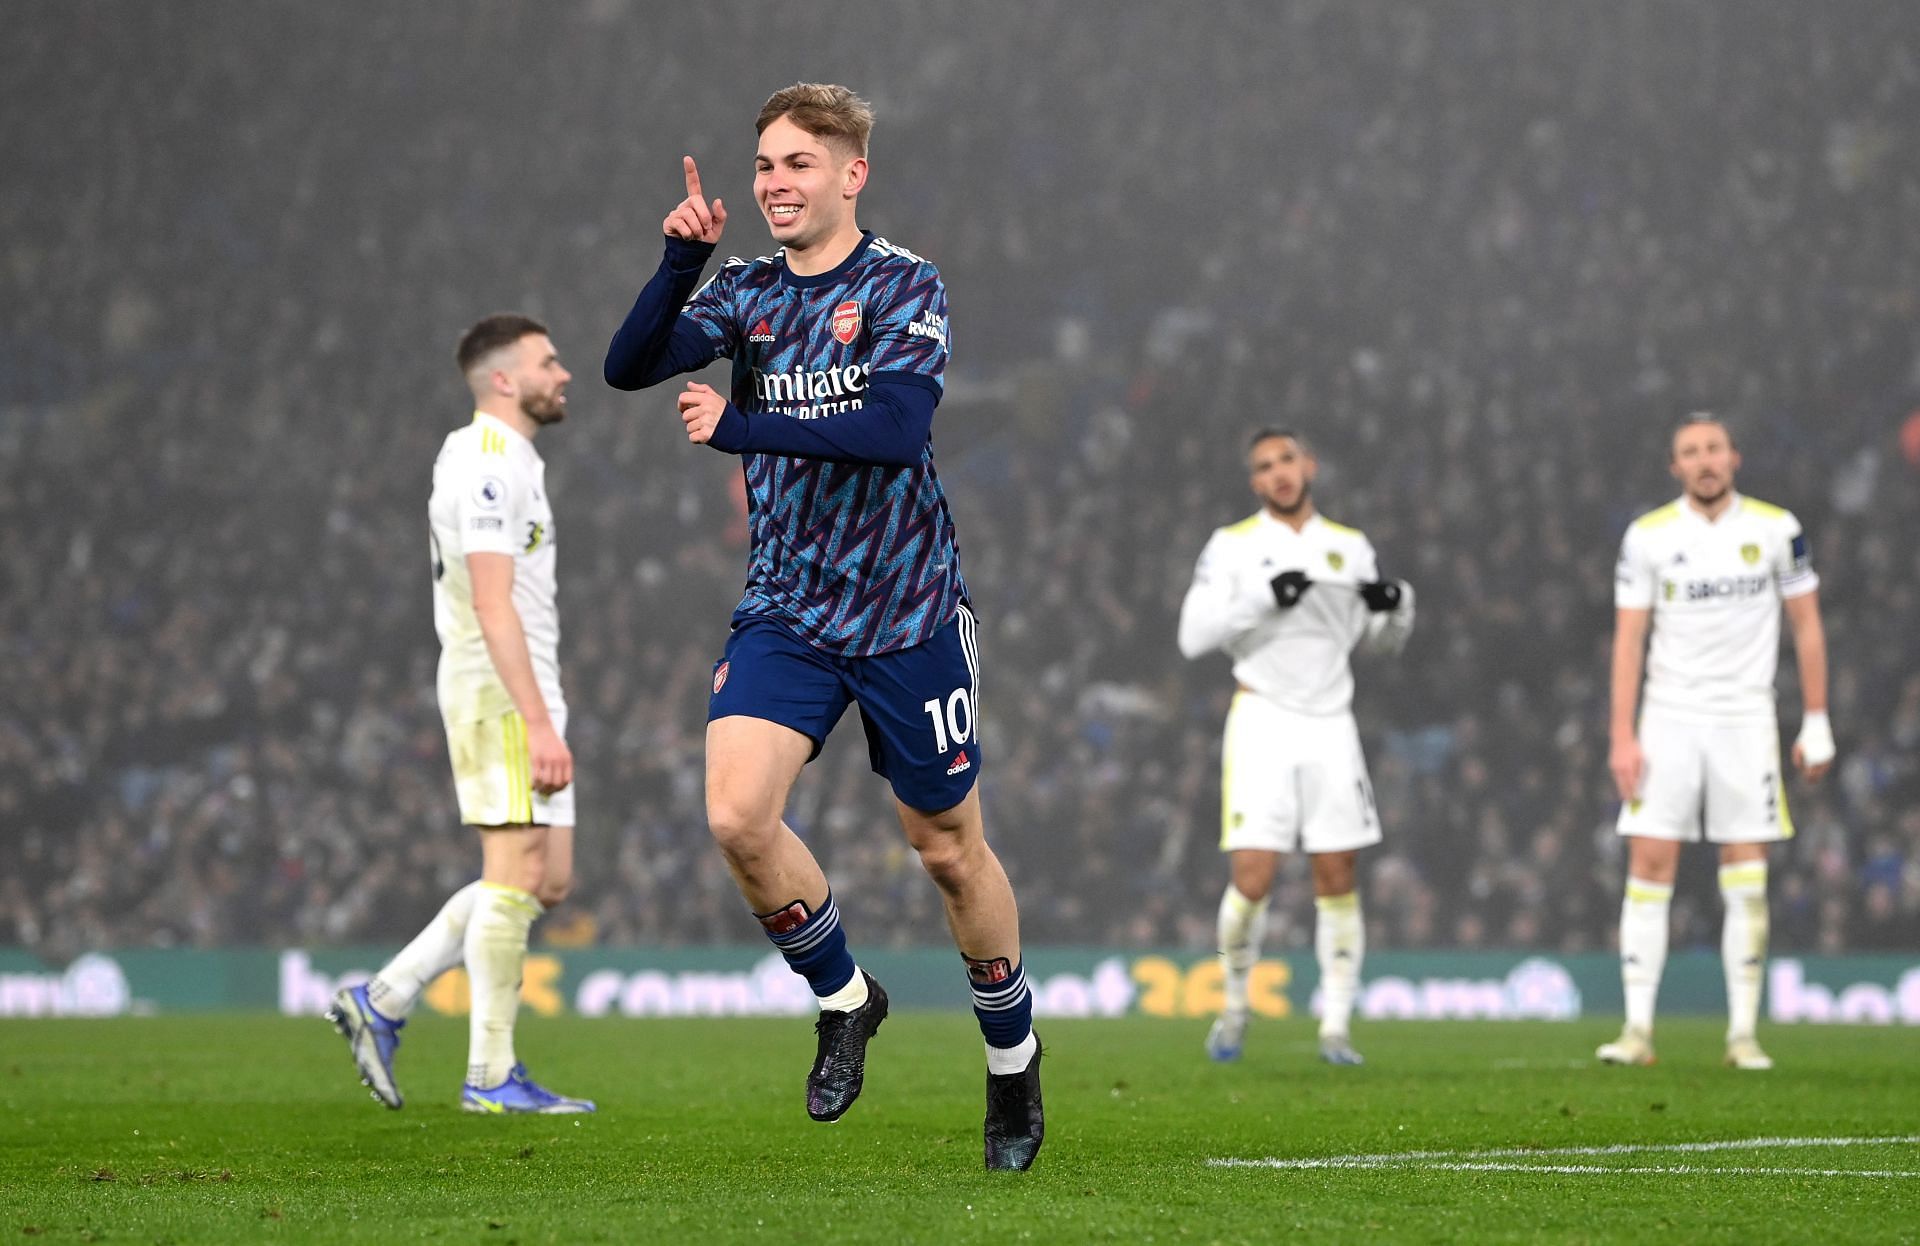 Emile Smith Rowe has surprised many with his performances this season